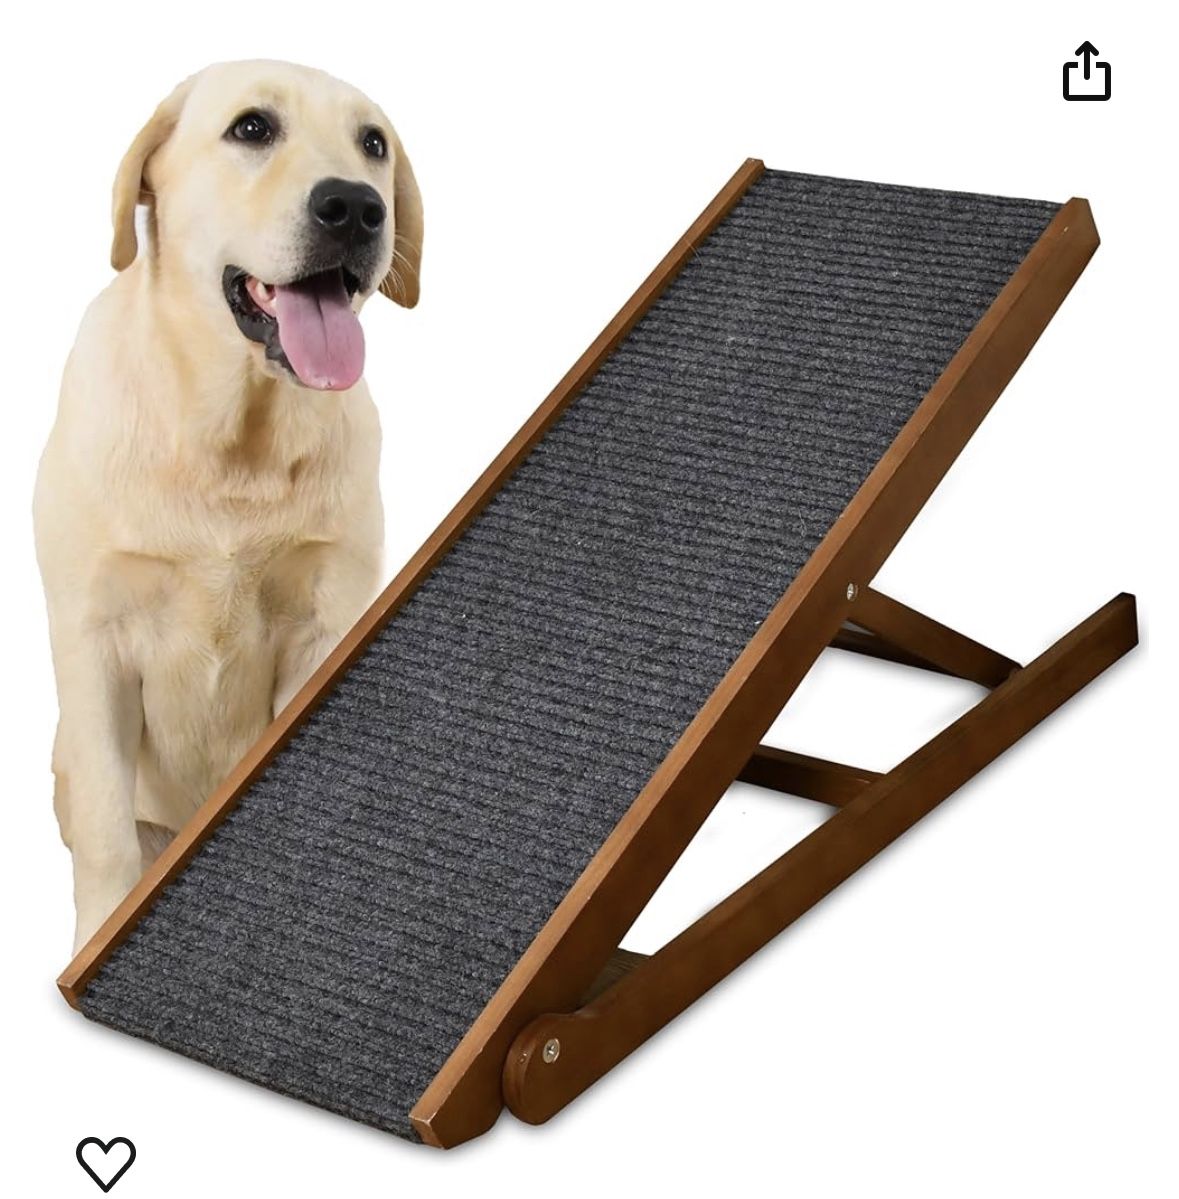 Adjustable Dog Ramp for Bed and Couch, Wooden Pet Ramp for Large & Small Dogs to Get on Bed or Couch, Rated for 250 LBS, Foldable Dog Steps for Large 